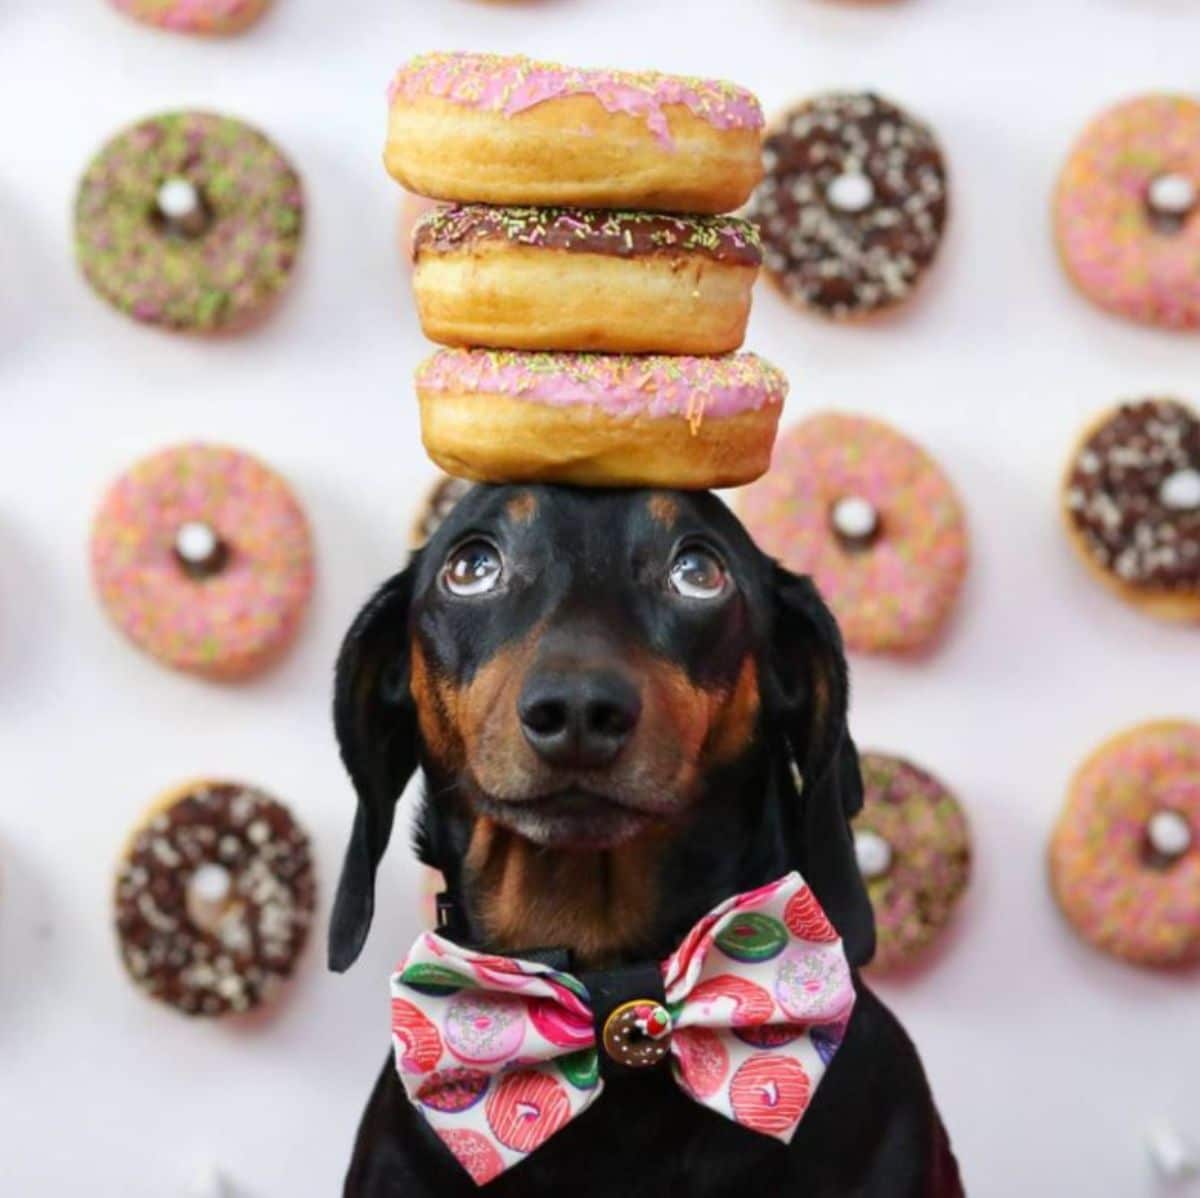 black and brown dachshund with 3 donuts on the head and wearing a donut themed bowtie